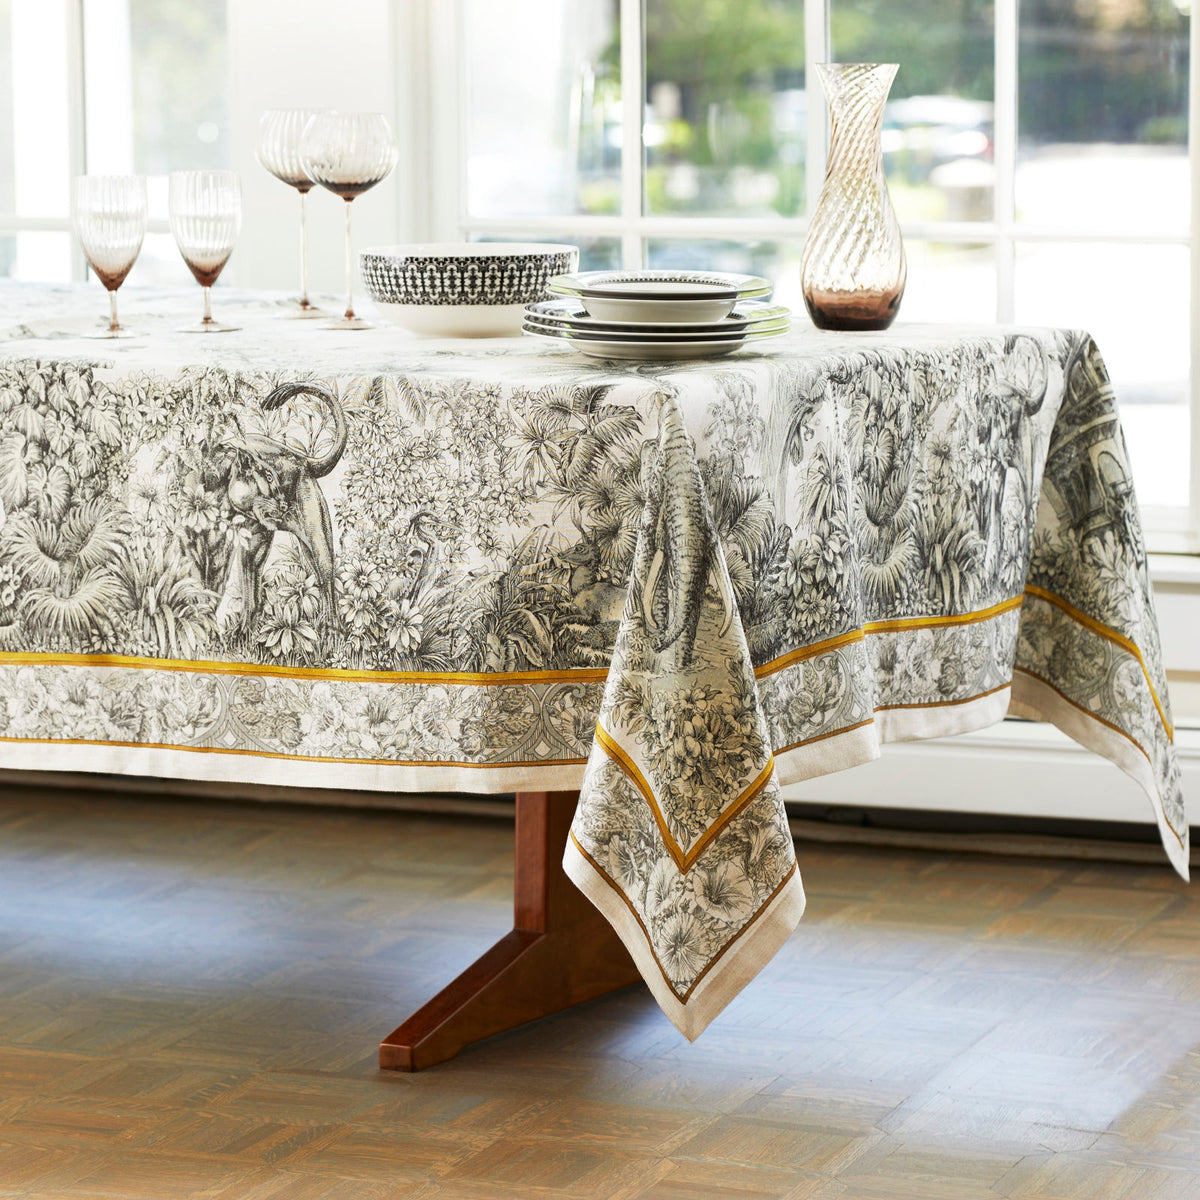 A Morocco Linen Tablecloth with a TTT design beautifully covers the table.